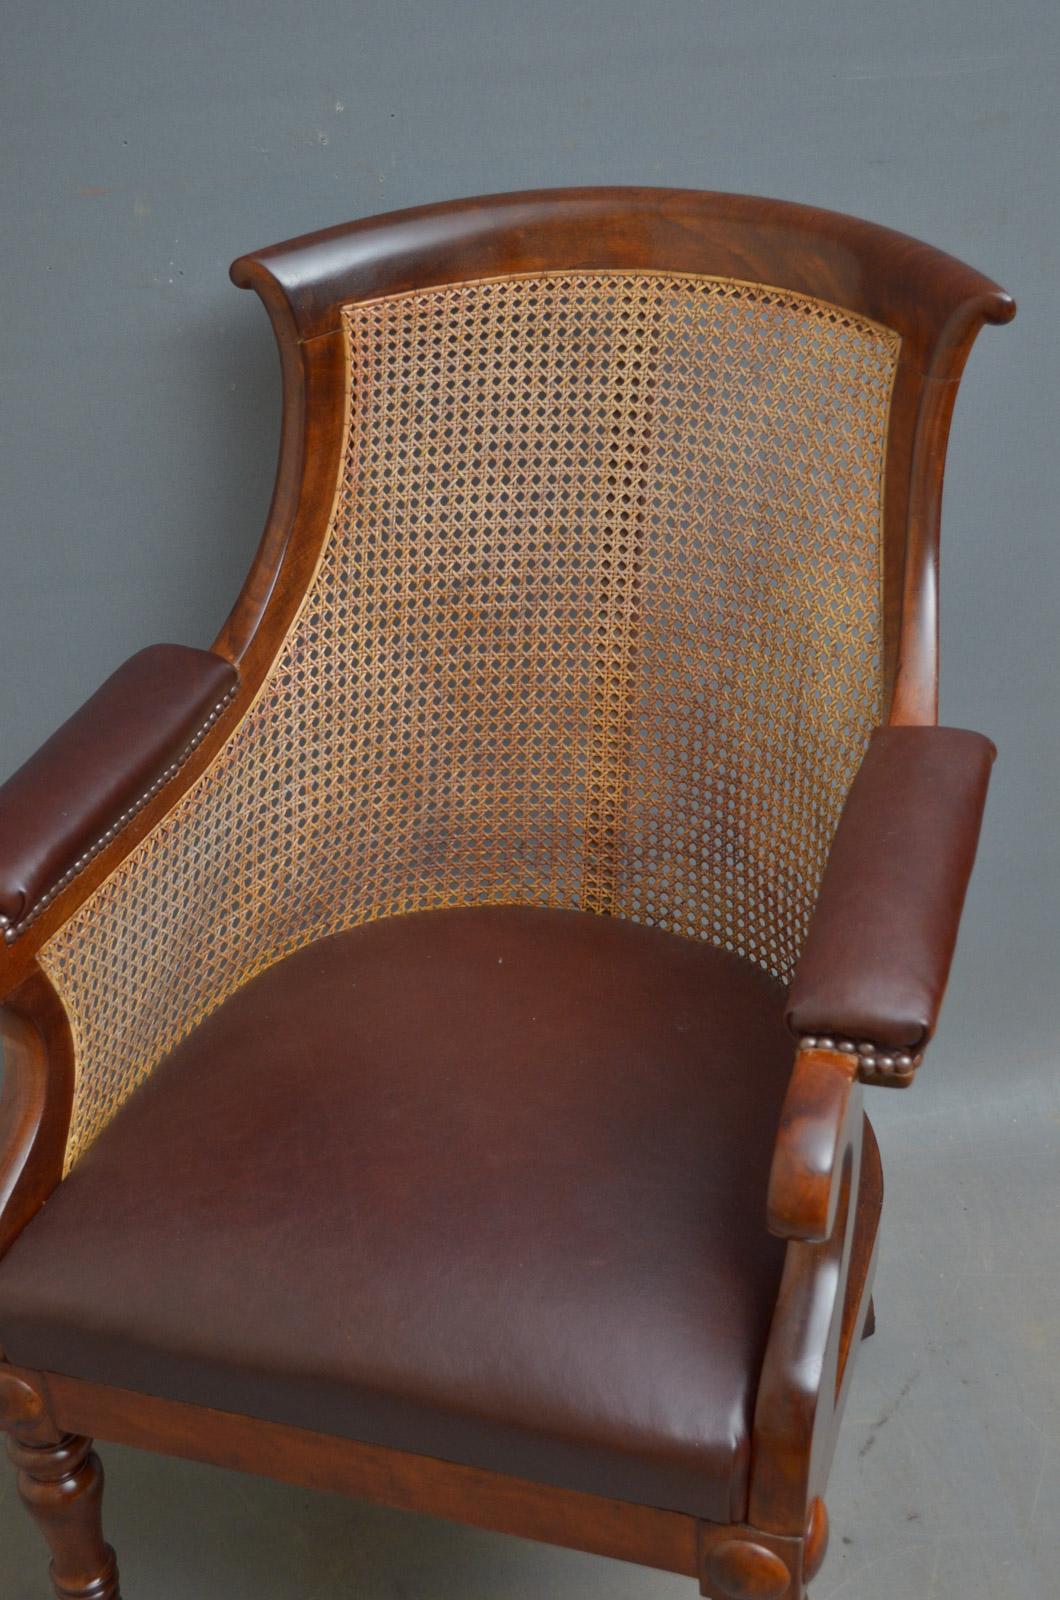 Sn4396, stylish early Victorian mahogany bergère library chair, having curved top rail with scrolled and leather padded arms, caned back and generous leather seat, standing on turned legs terminating in original brass castors. This caned armchair is